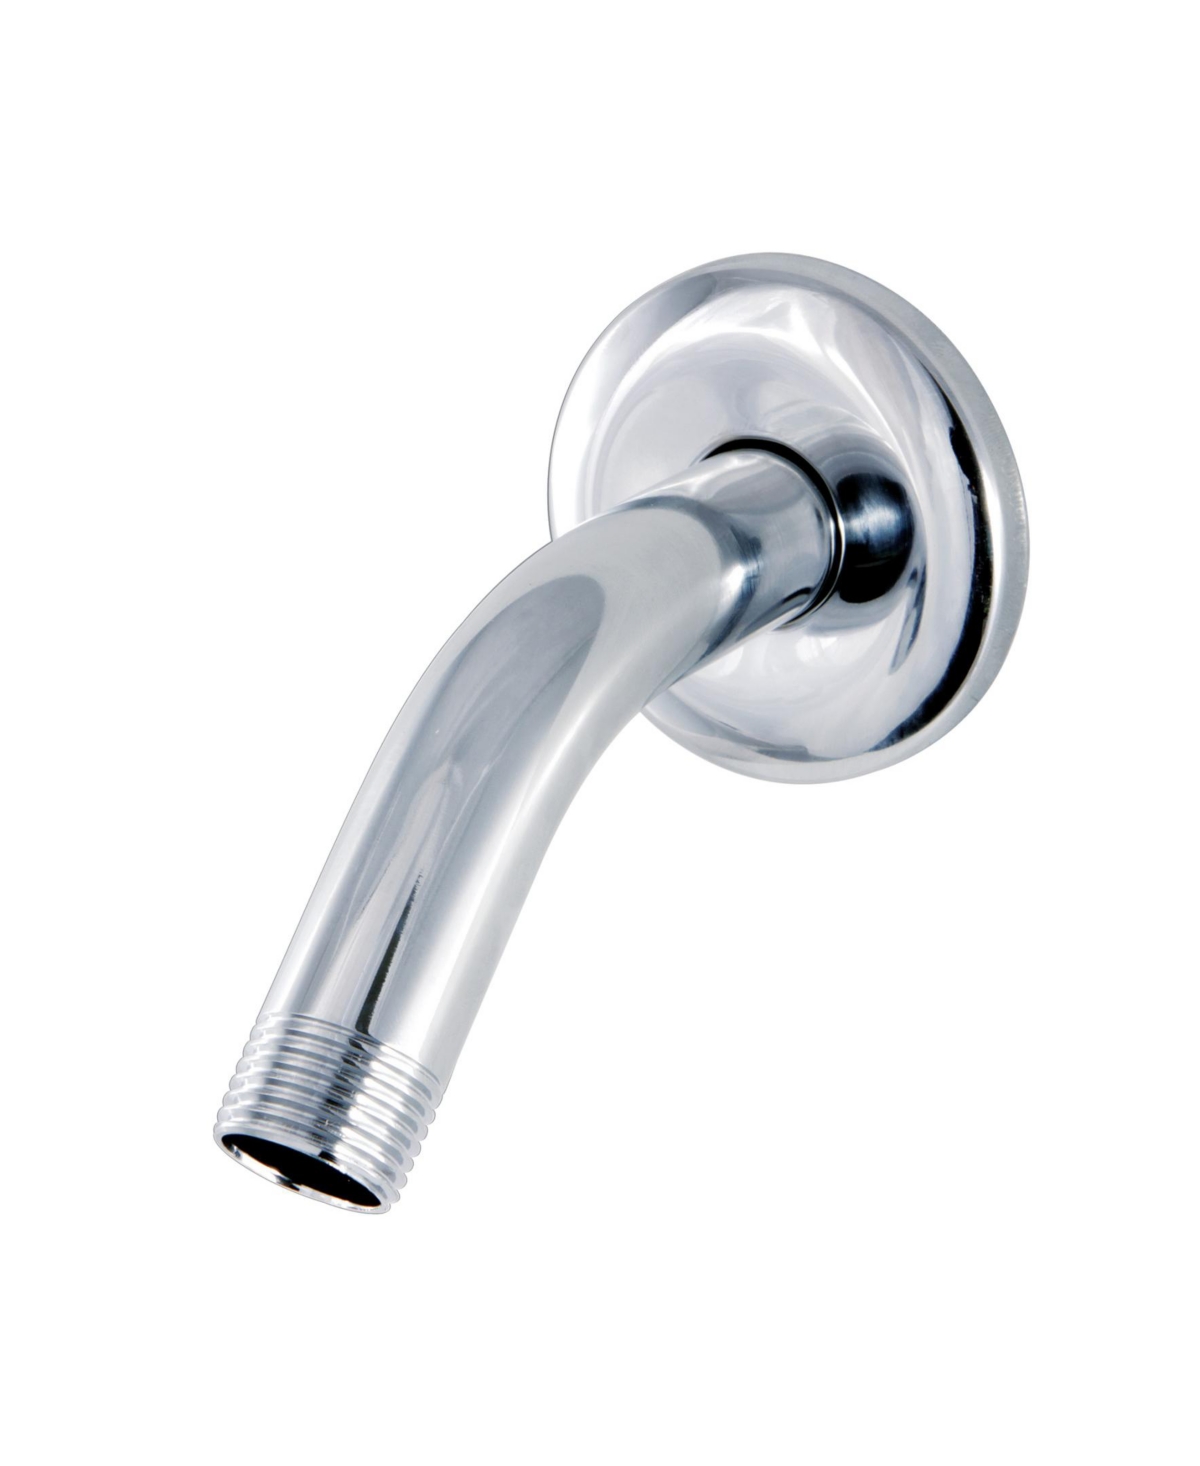 Kingston Brass 6-Inch Shower Arm with Flange in Polished Chrome Bedding